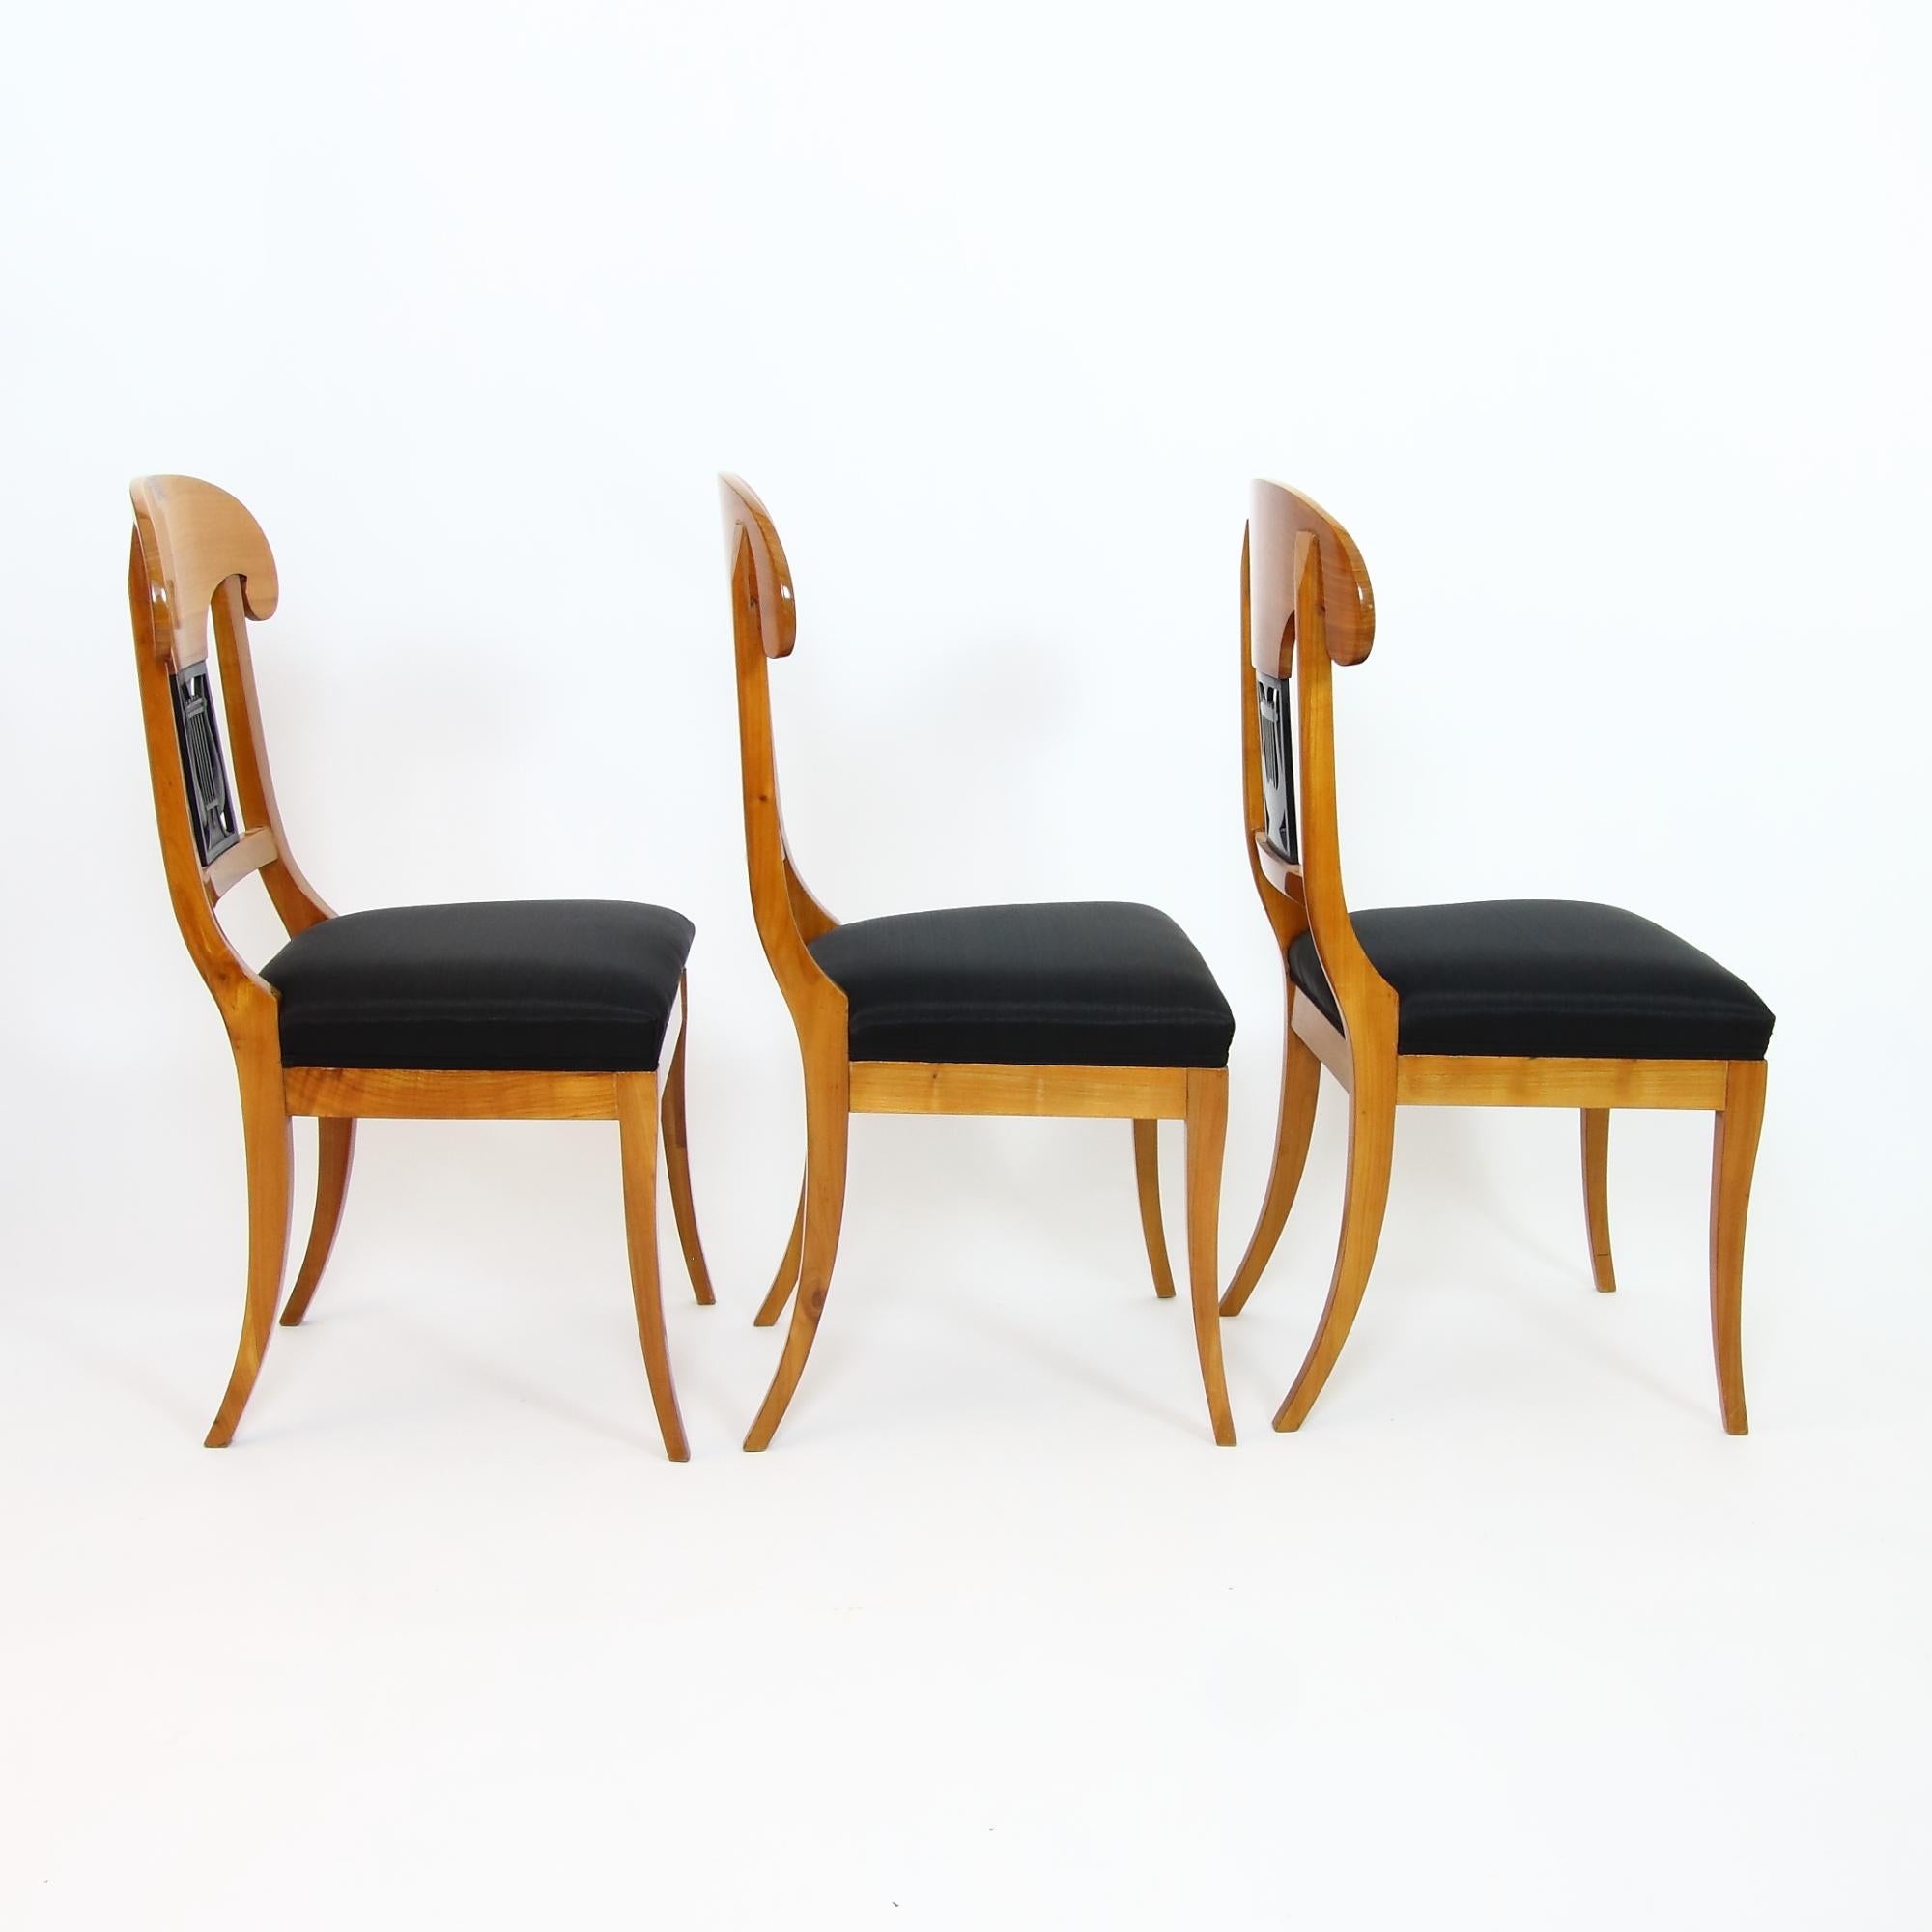 Set of 8 Partially Early 19th German Biedermeier Saxe-Coburg Provenance Chairs In Good Condition For Sale In Berlin, DE